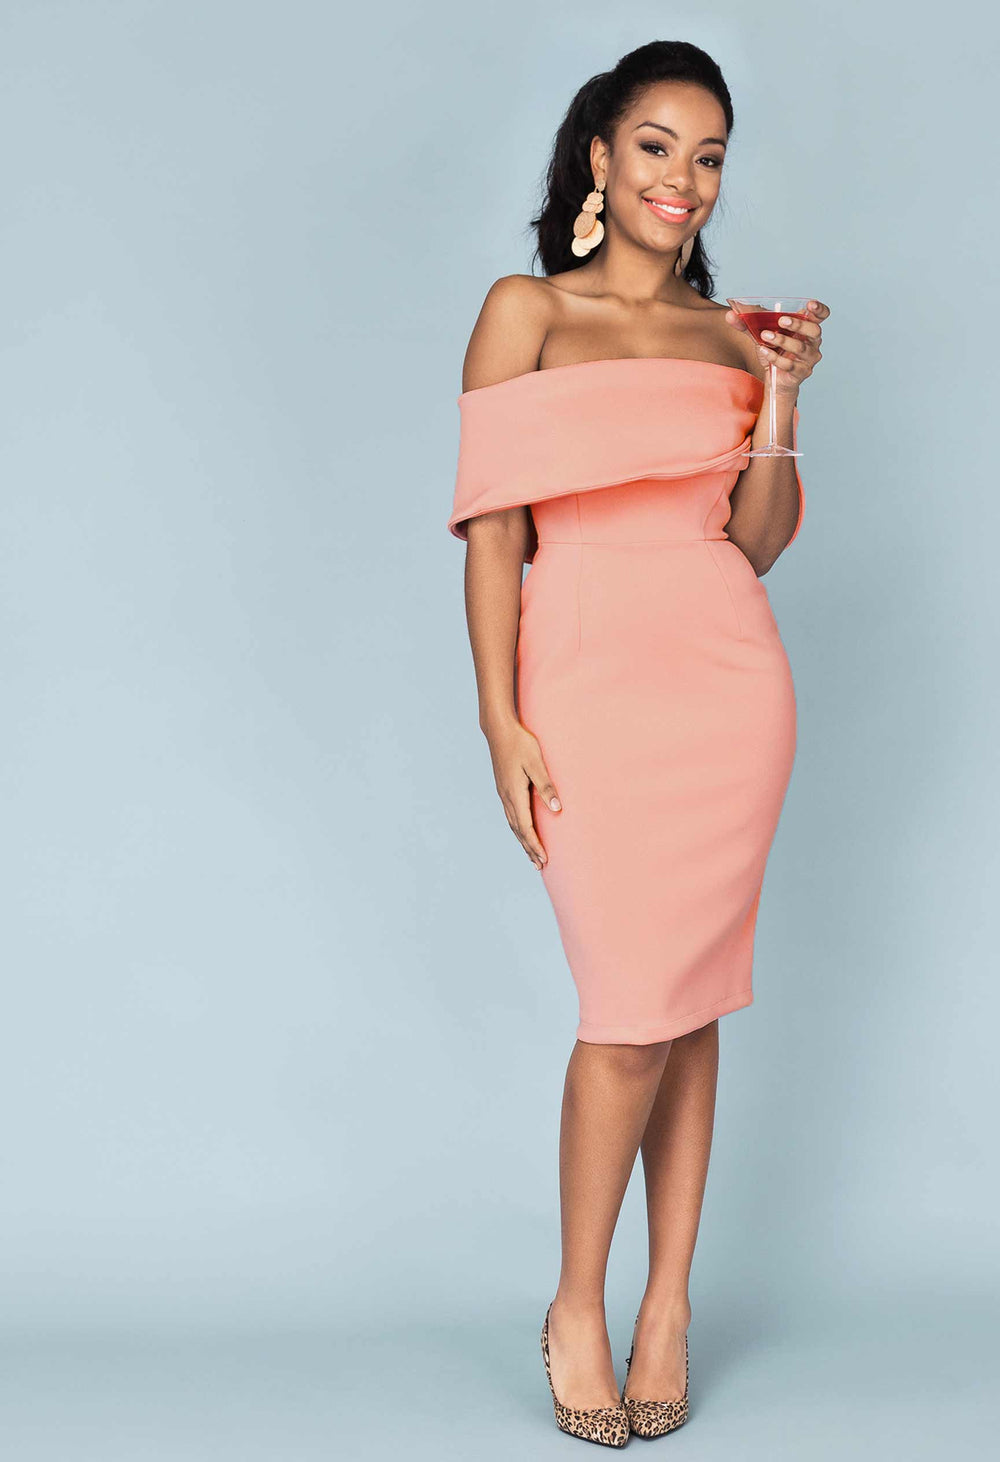 Our Lady of Leisure Margarita Dress